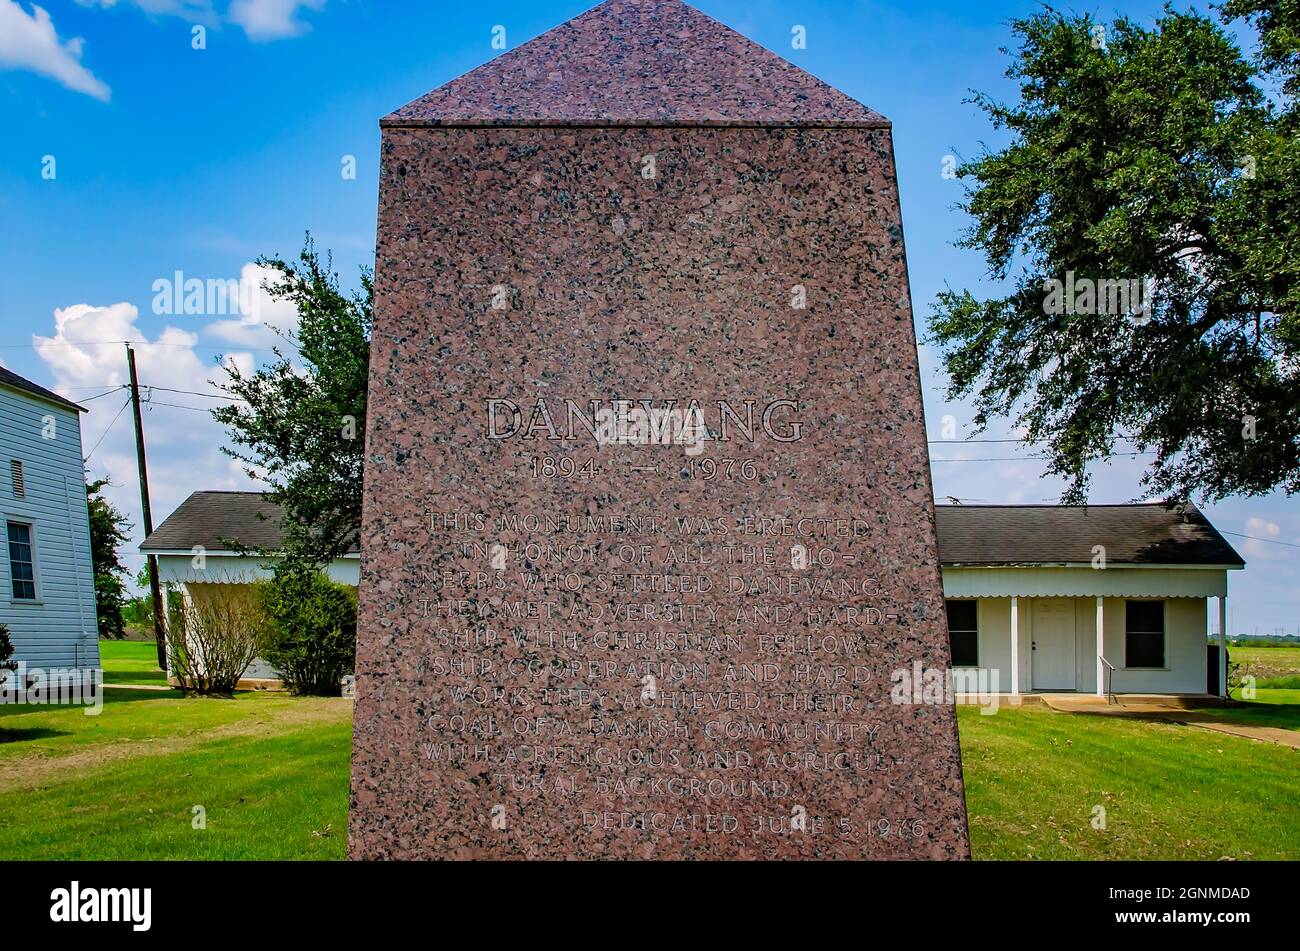 A monument honors the Danish settlers of Danevang, Sept. 3, 2017, in Danevang, Texas. The community of Danevang was established by Danish settlers. Stock Photo